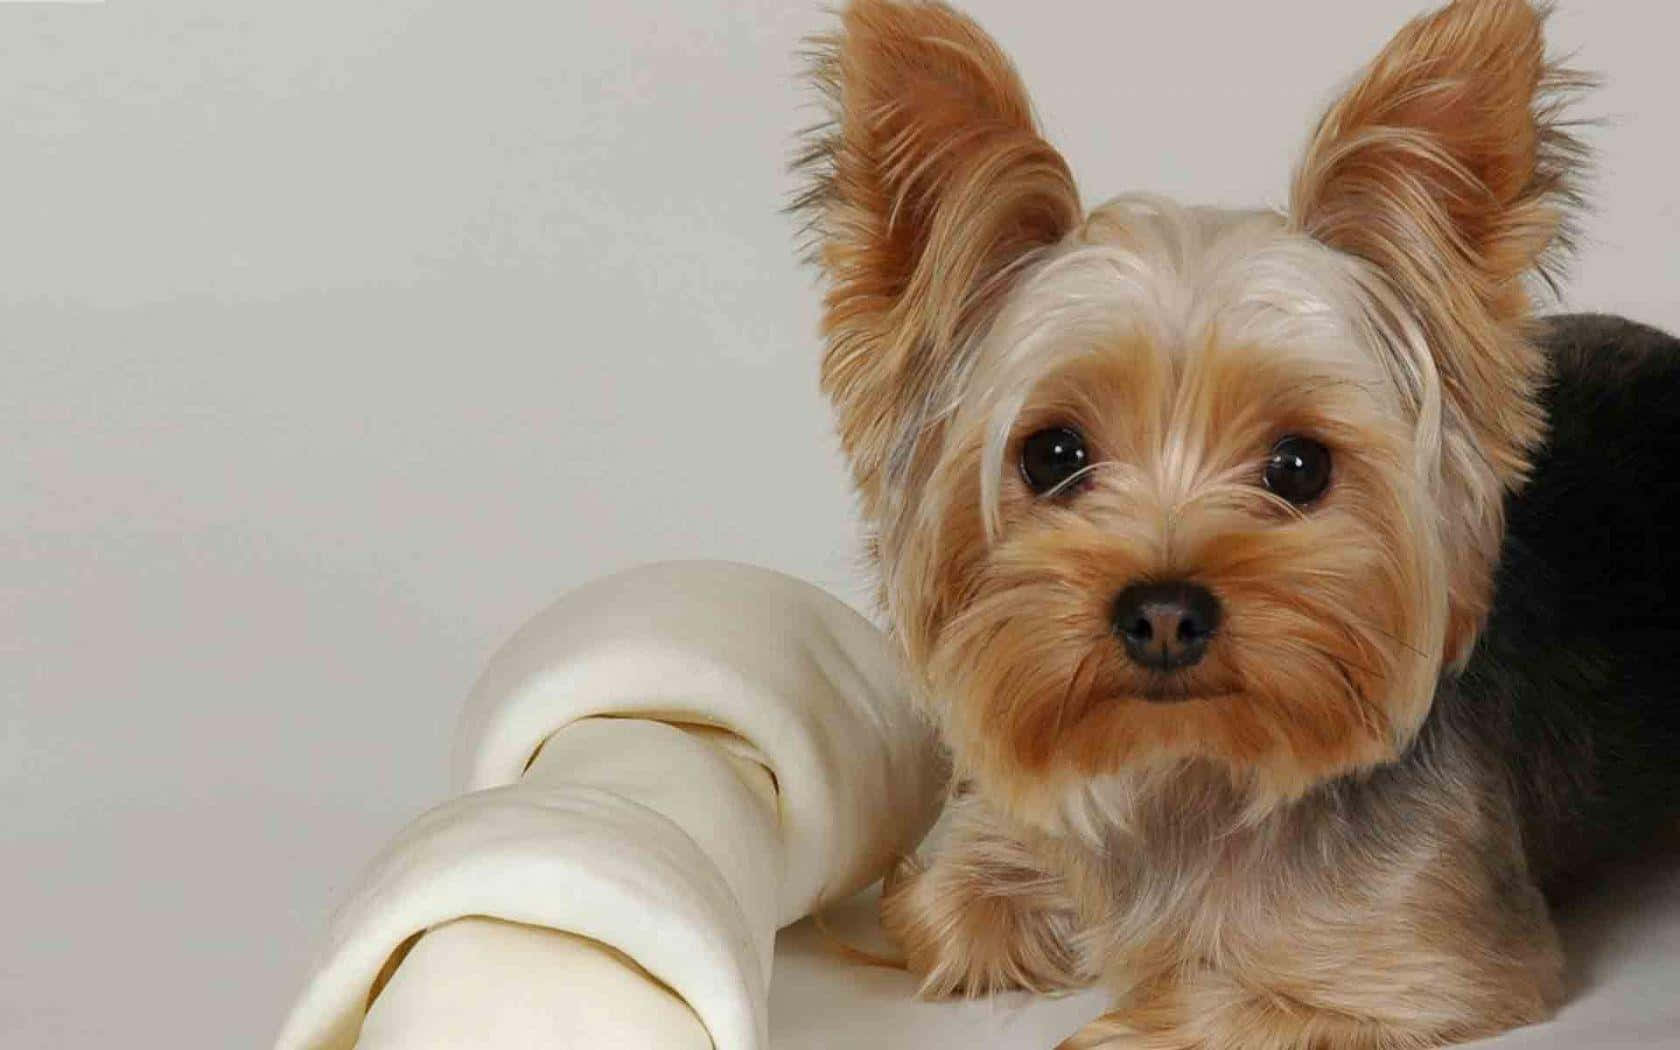 A cute fluffyYorkie dog with bright eyes and a full grown coat